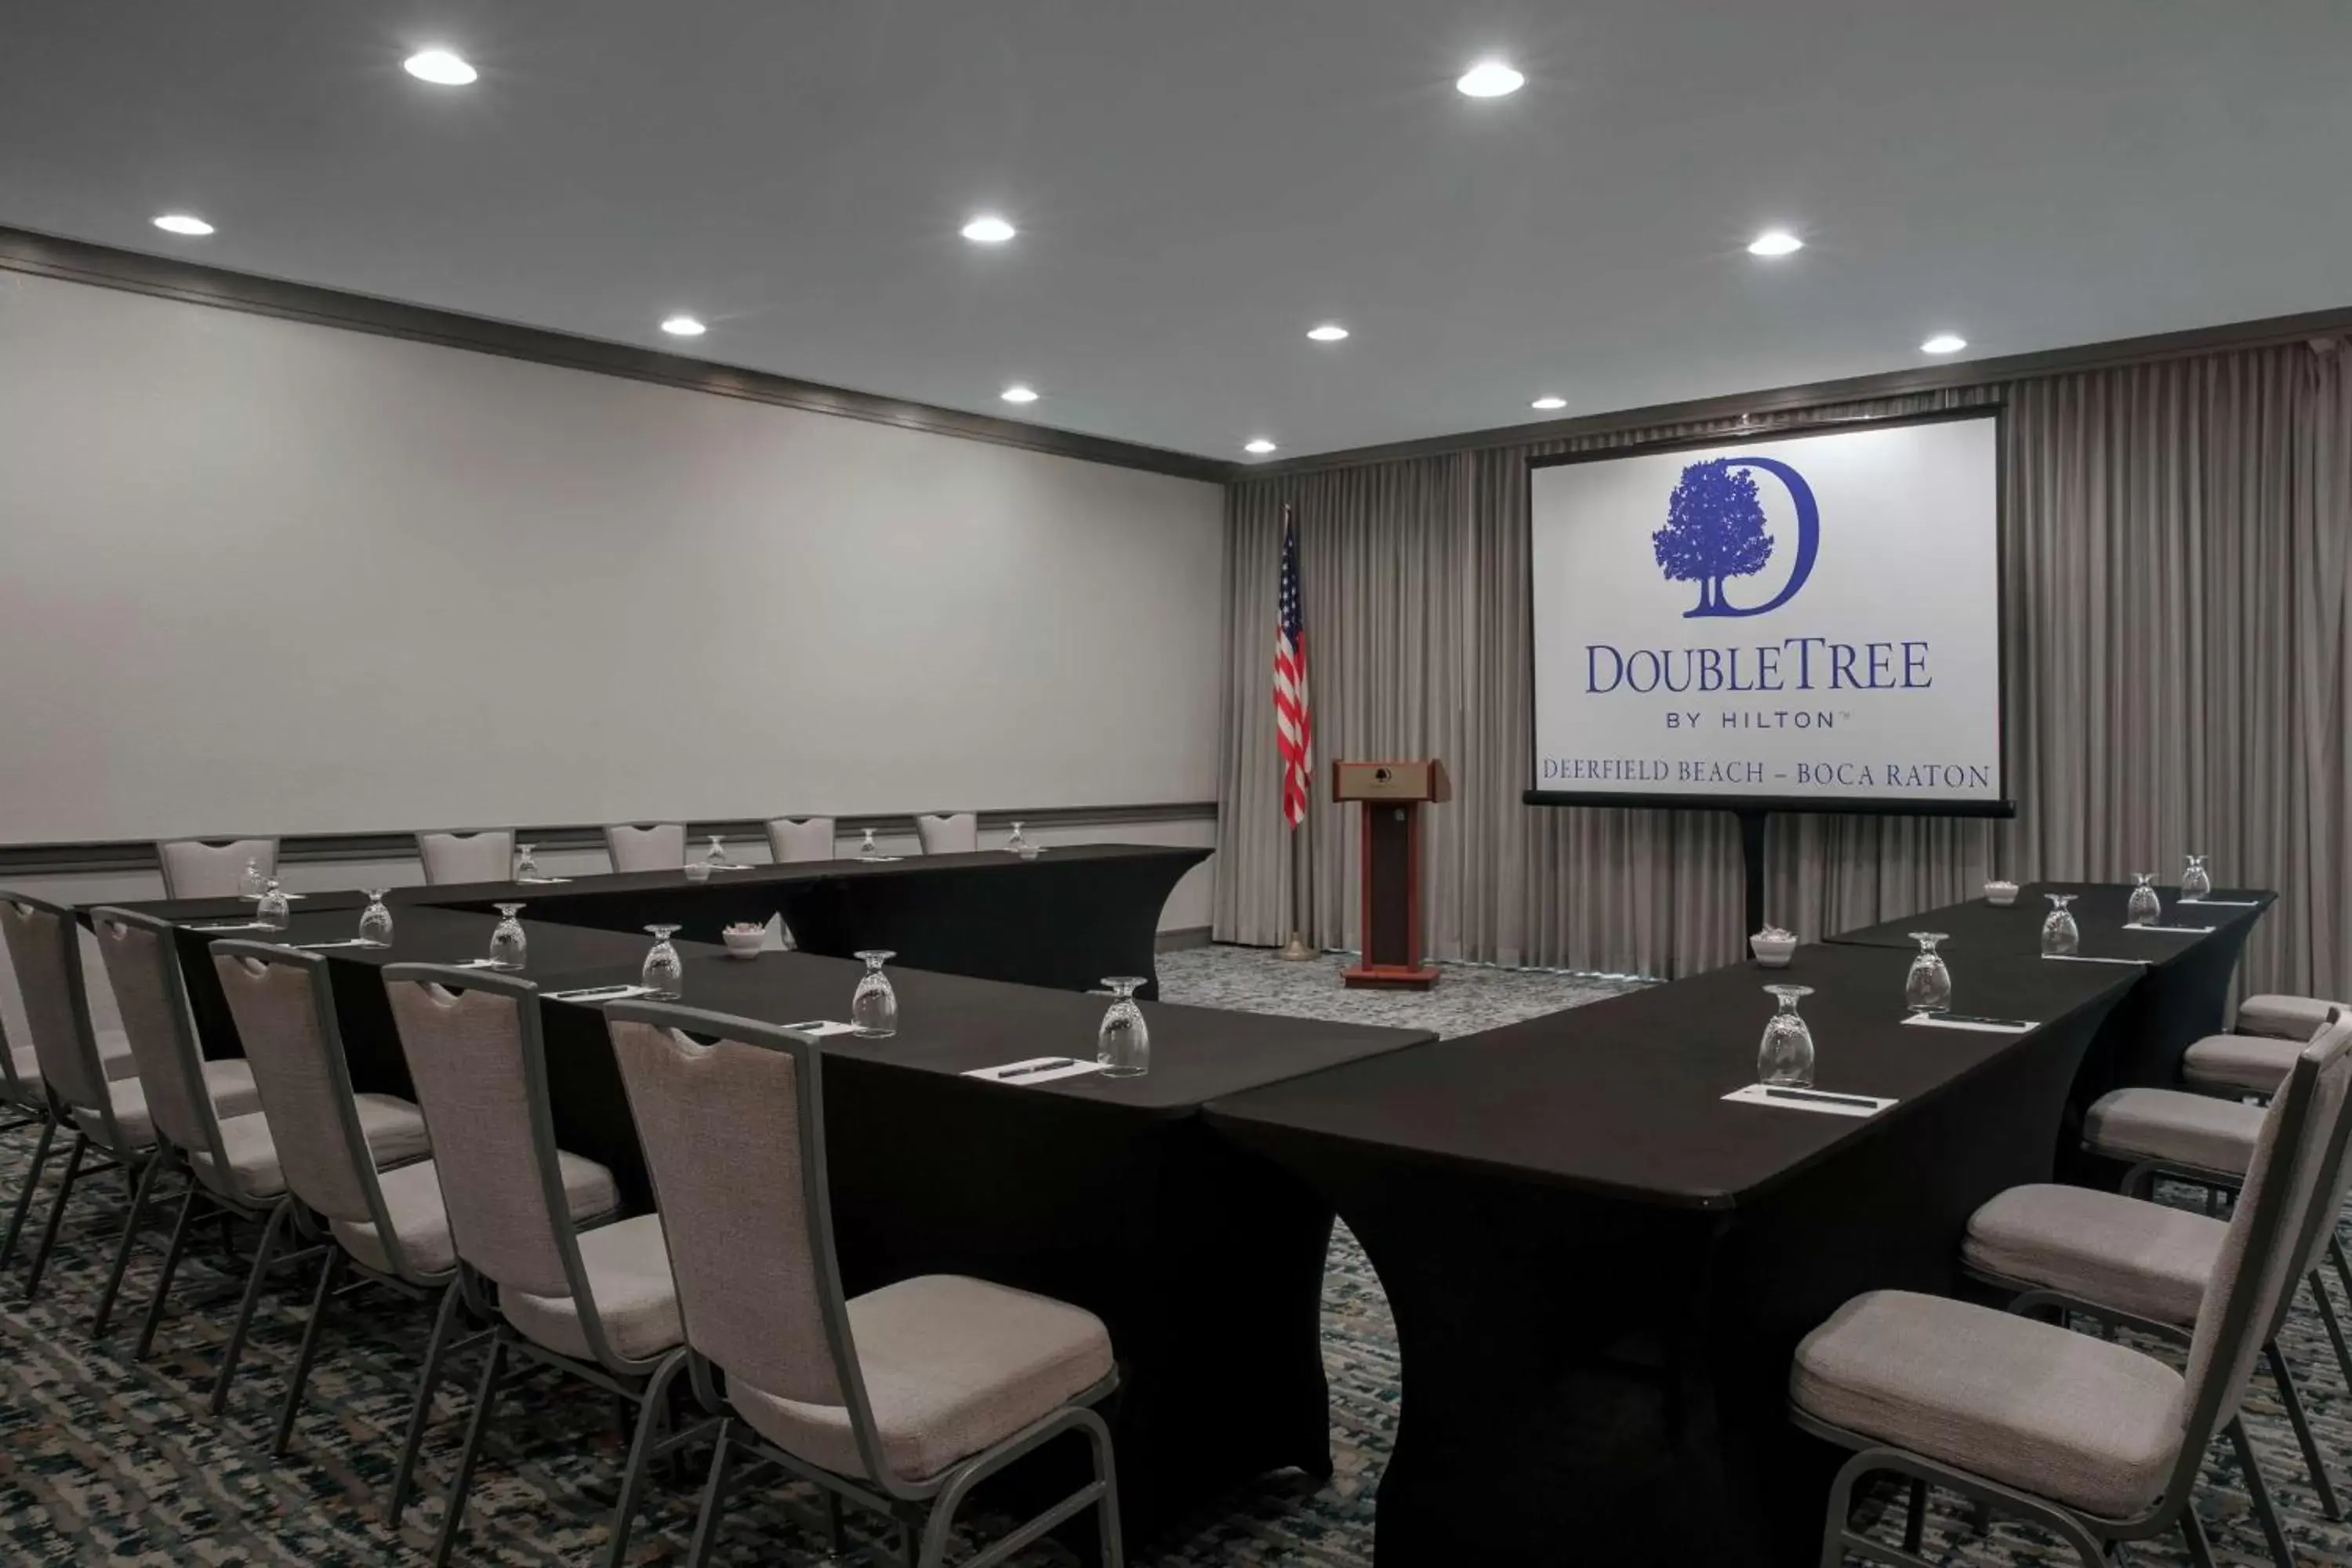 Meeting/conference room in DoubleTree by Hilton Hotel Deerfield Beach - Boca Raton